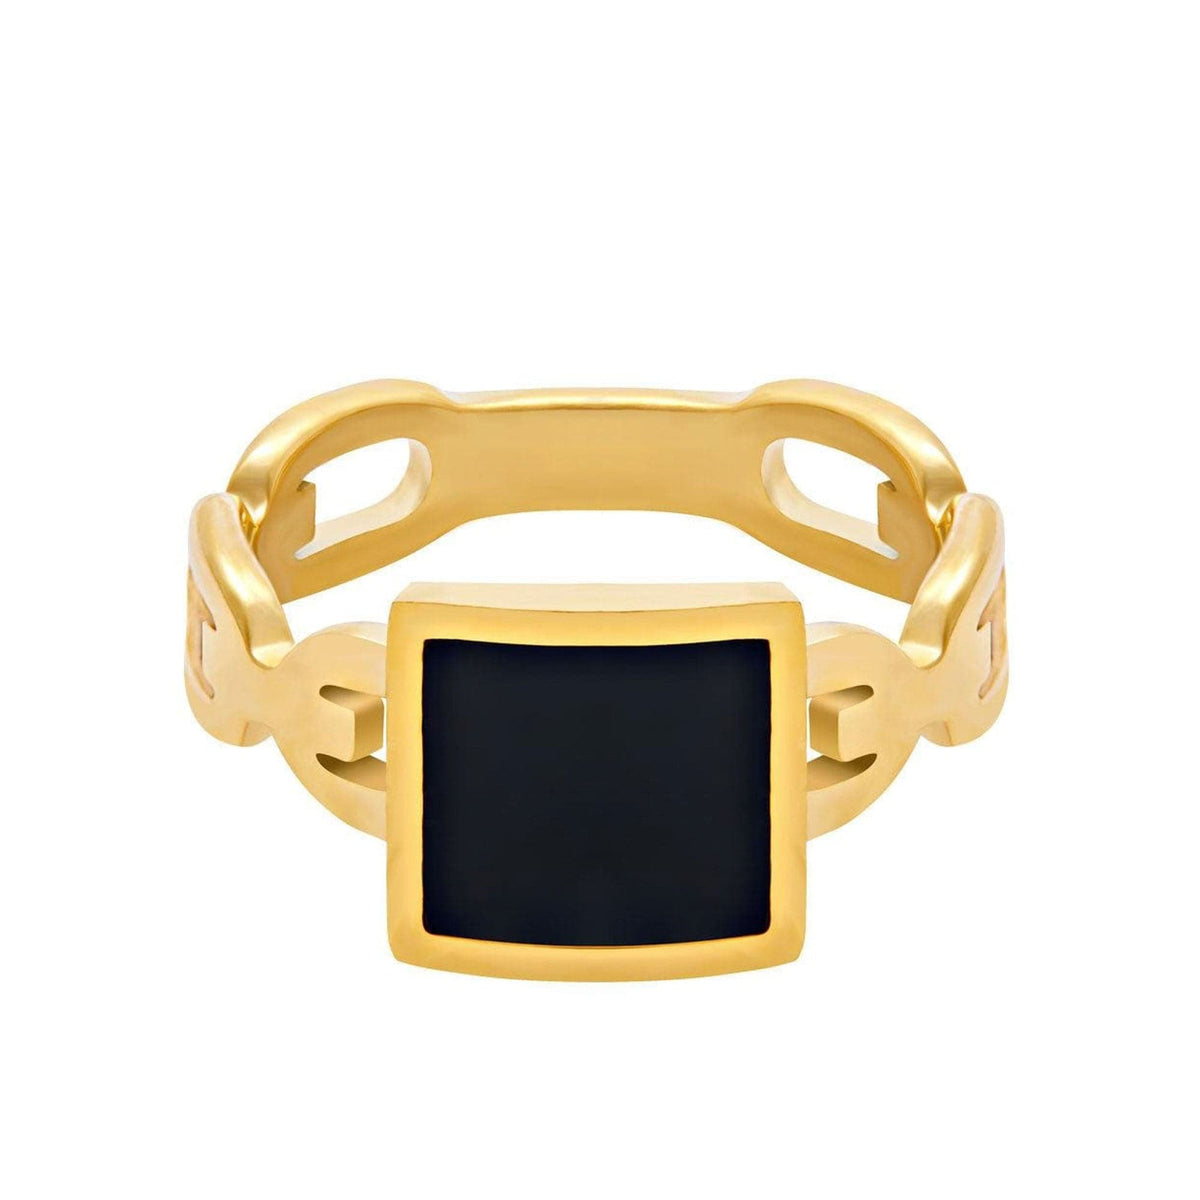 BohoMoon Stainless Steel Aria Ring Gold / US 6 / UK L / EUR 51 (small)